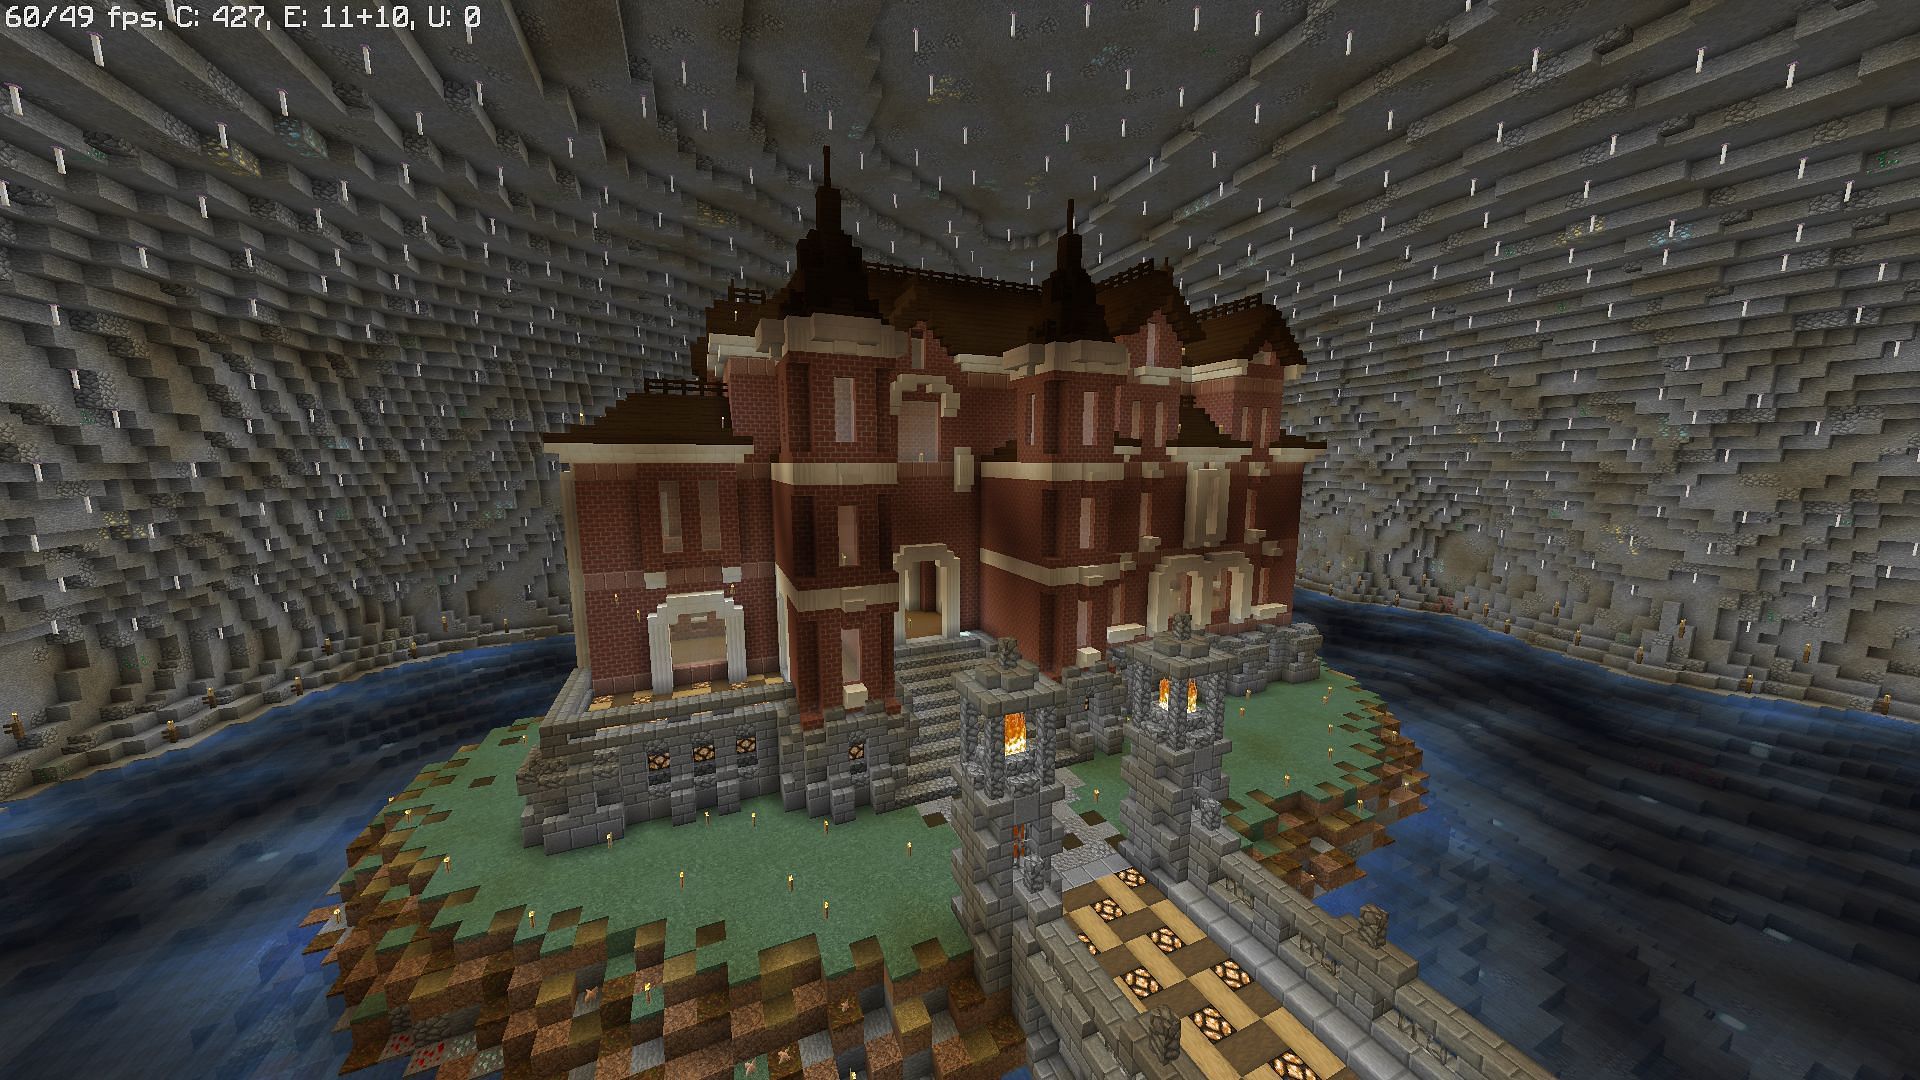 With enough space, Minecraft players can make a mansion of their dreams all underground (Image via Aminto9/Reddit)